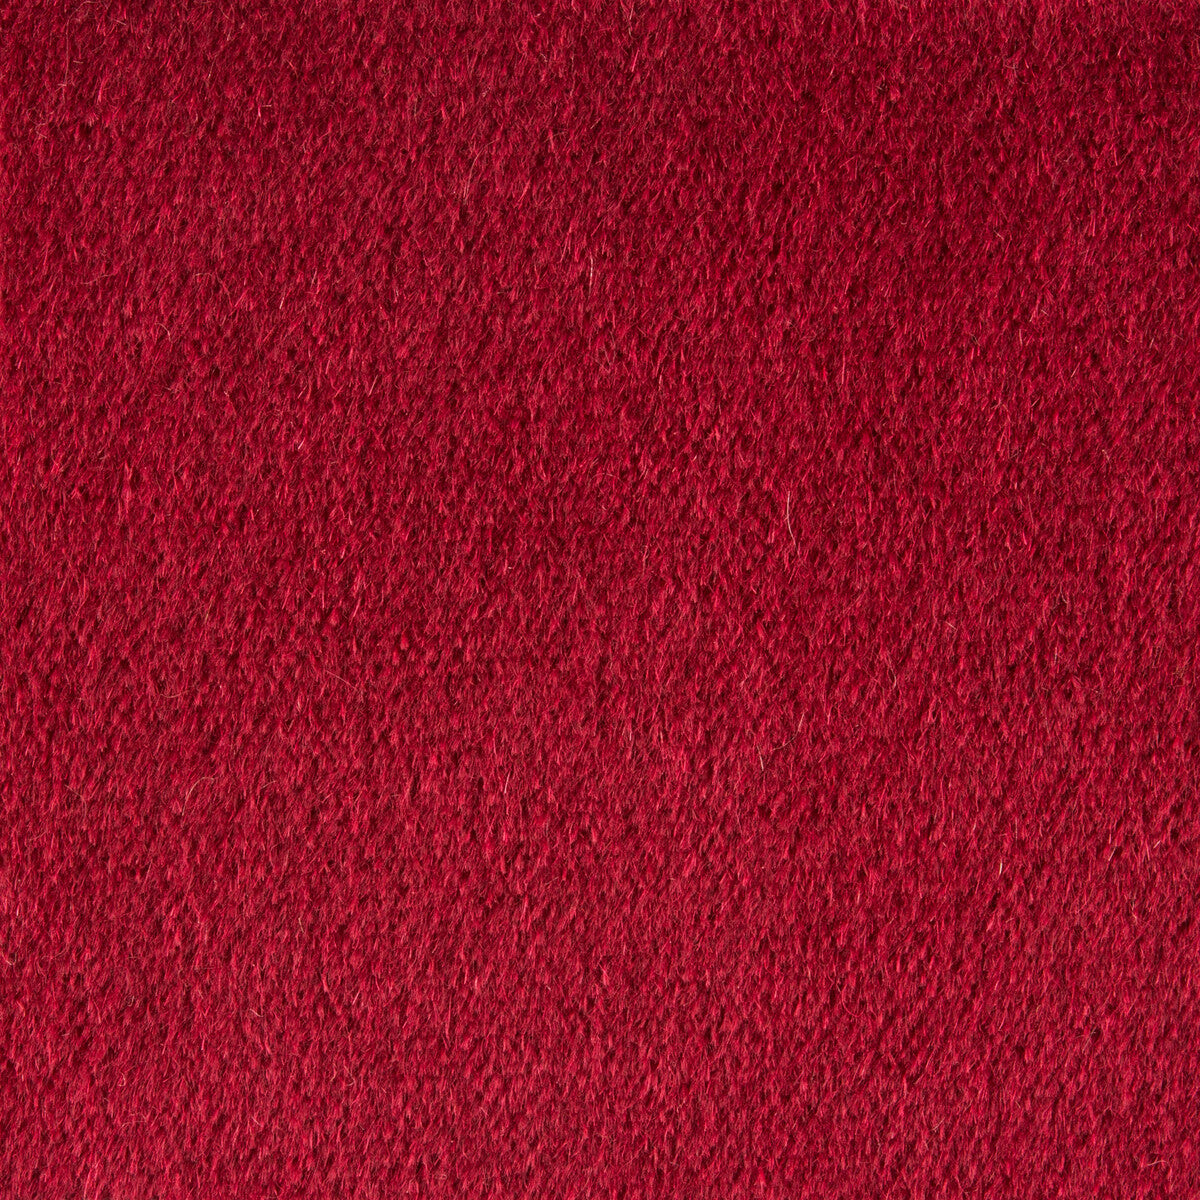 Autun Mohair Velvet fabric in berry color - pattern BR-89778.140.0 - by Brunschwig &amp; Fils